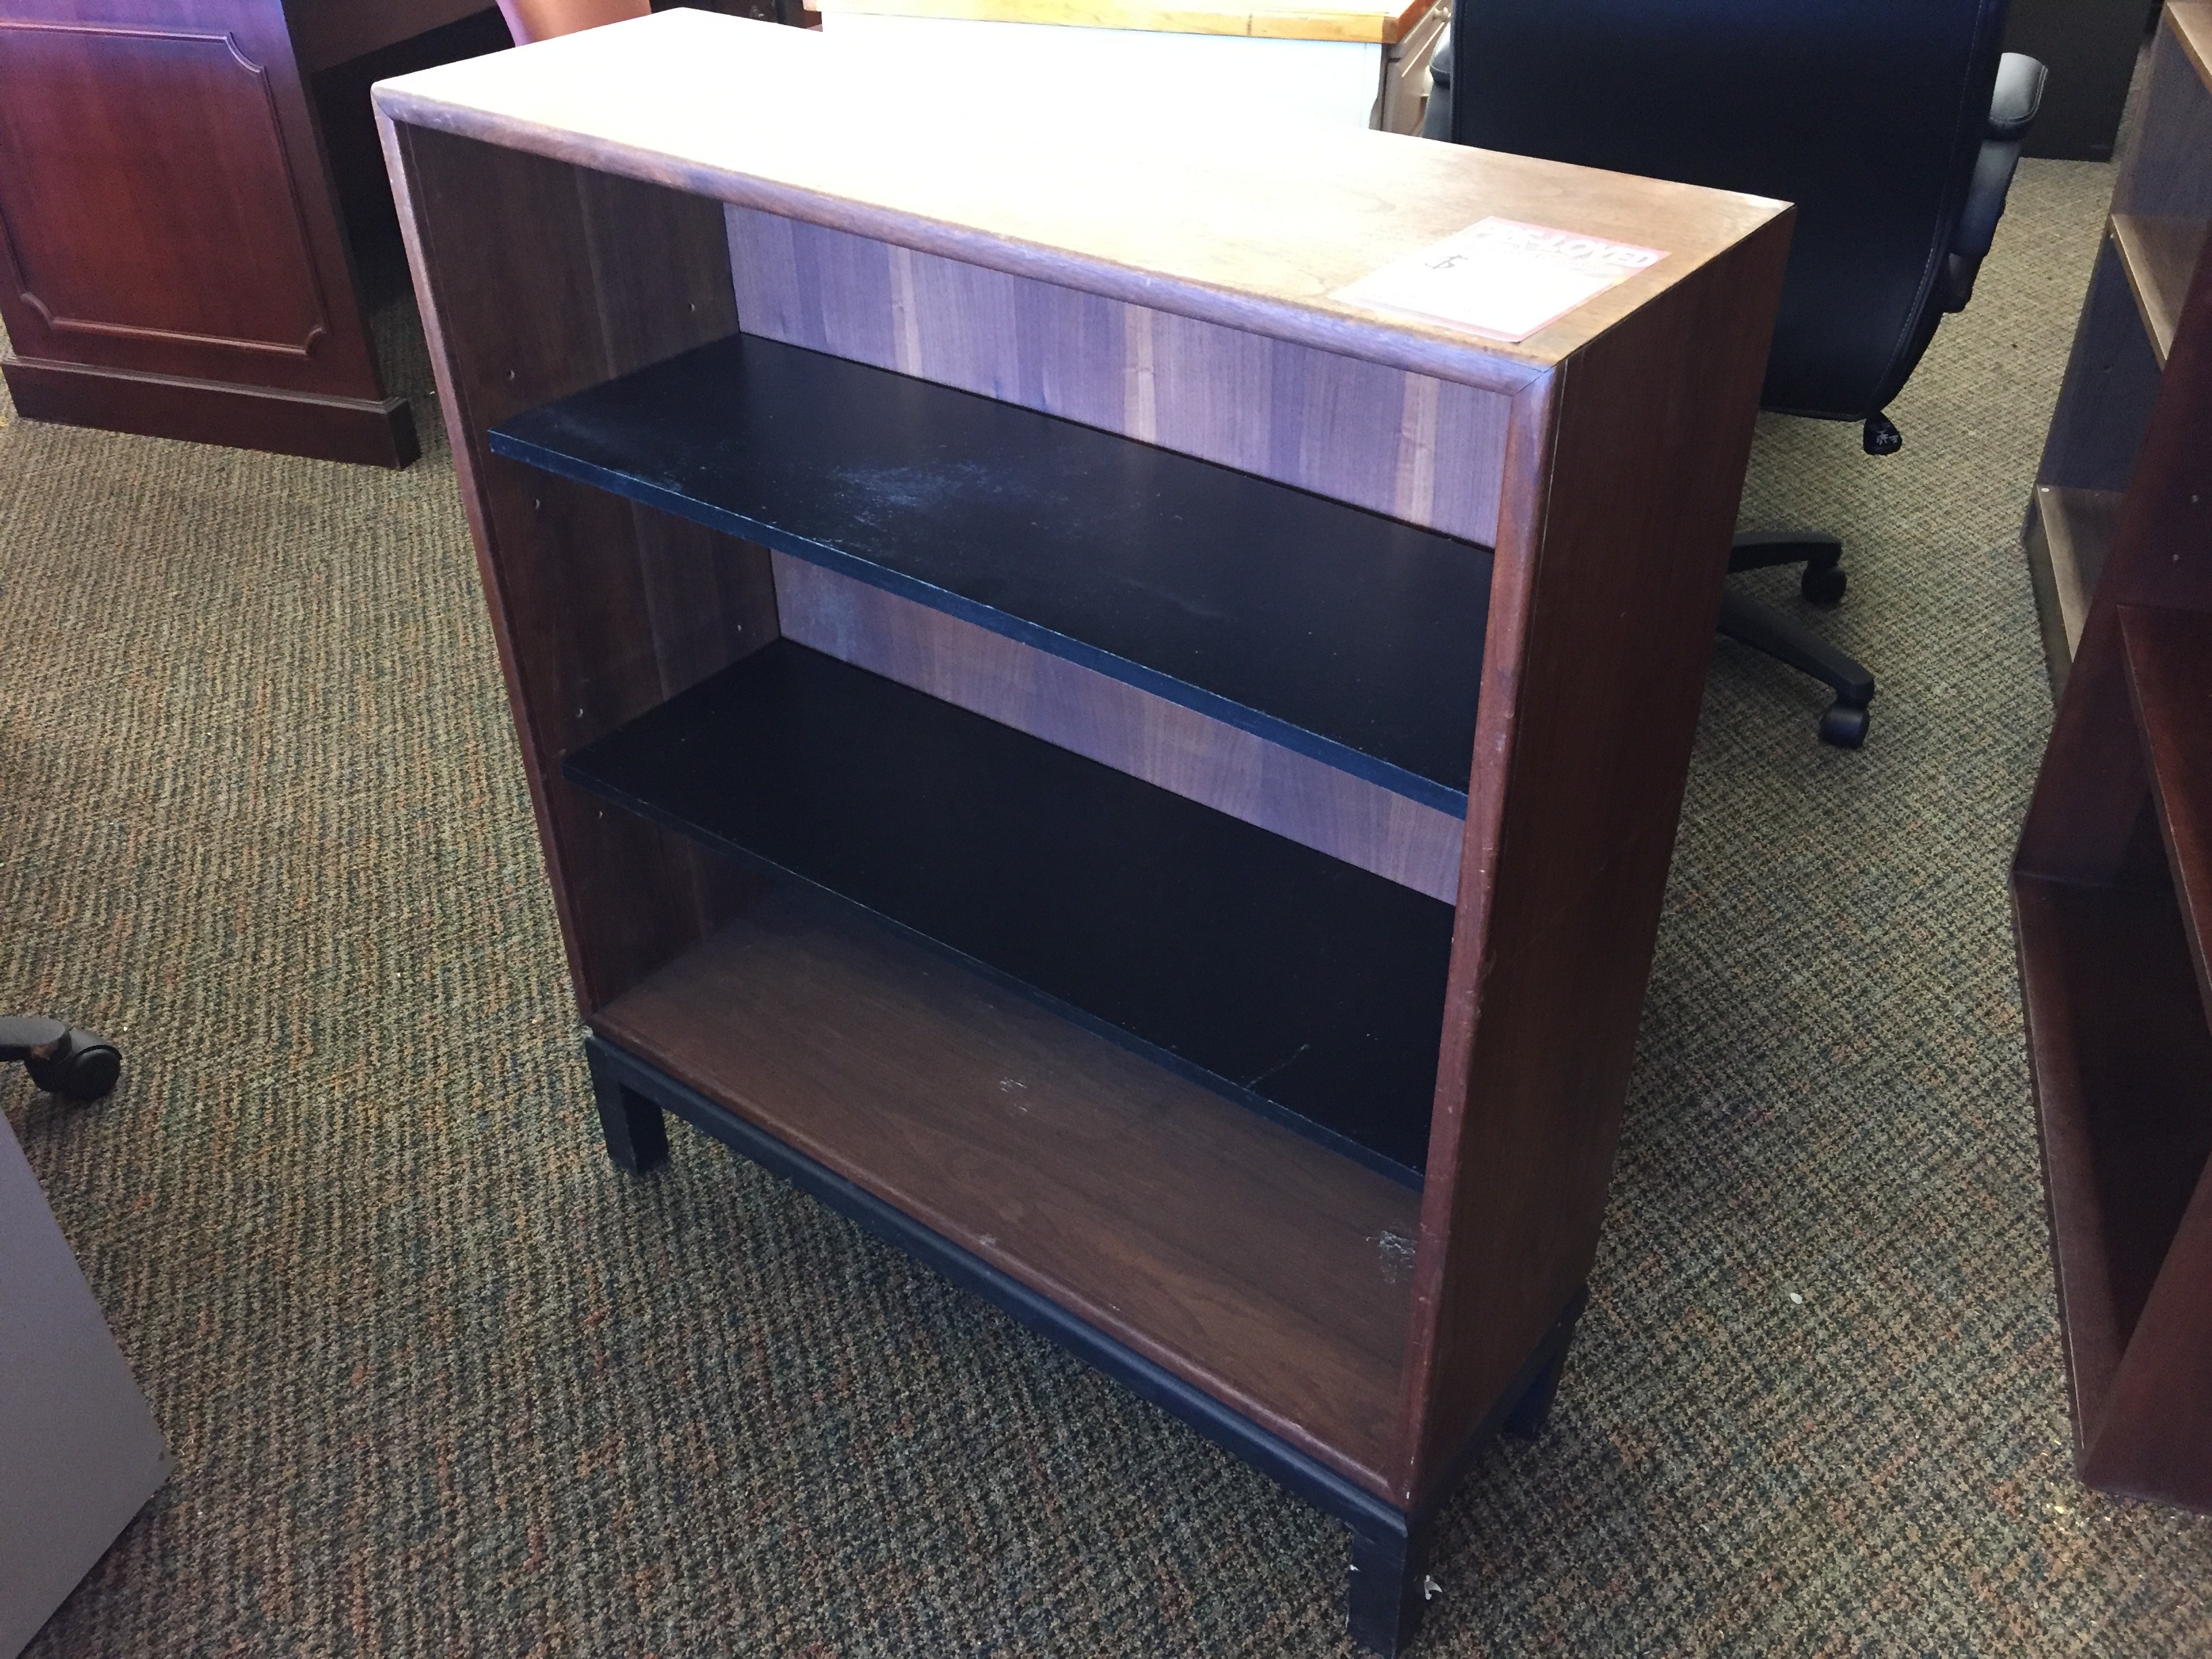 Used Compact Bookcase With Two Shelves 